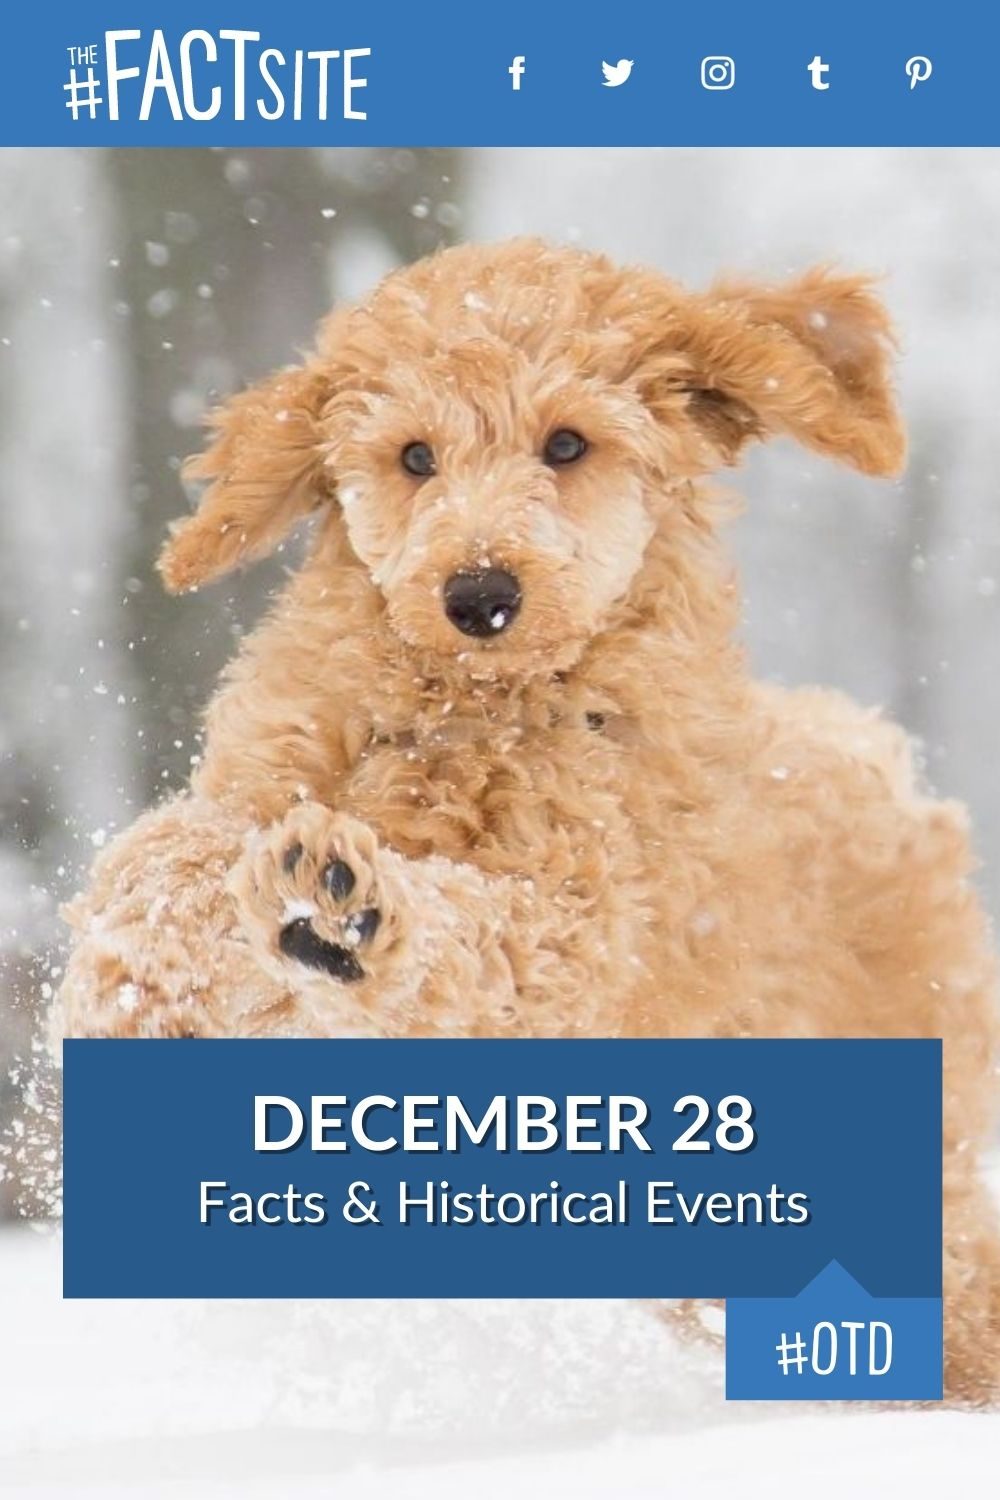 Facts & Historic Events That Happened on December 28